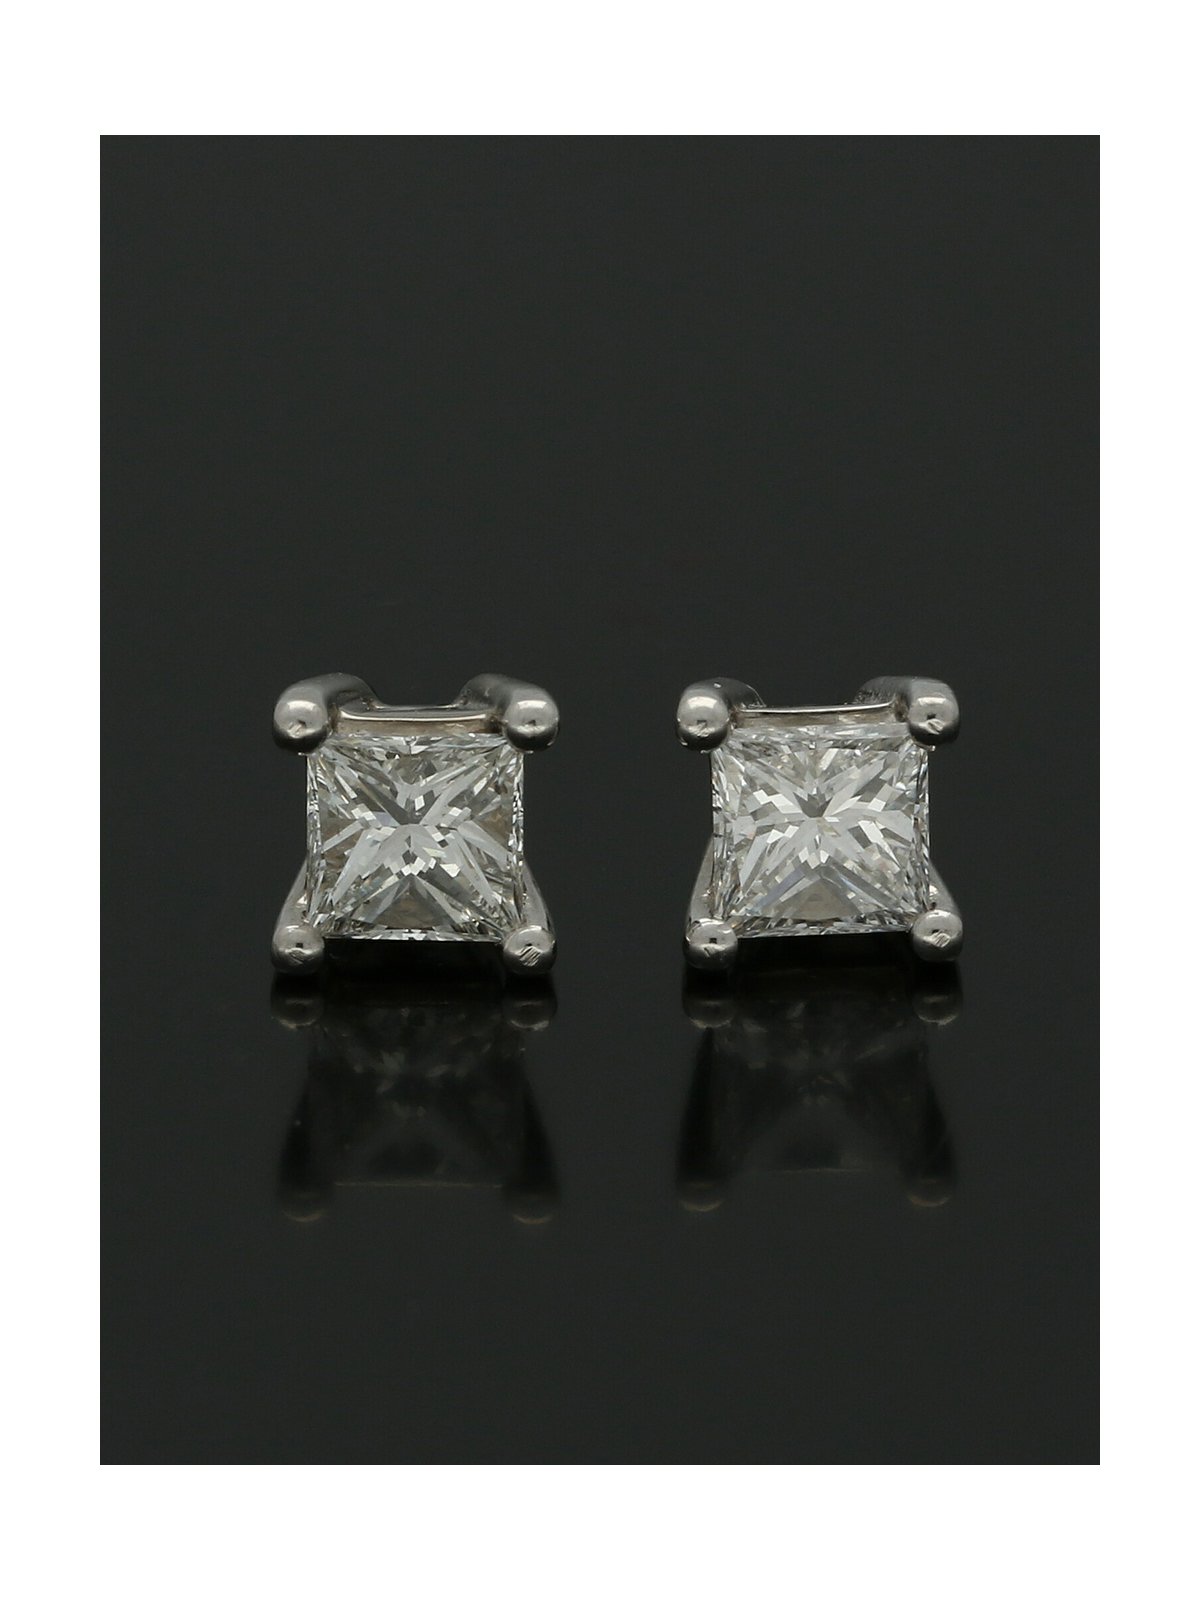 Diamond Solitaire Stud Earrings "The Grace Collection" 0.60ct Princess Cut in 18ct White Gold